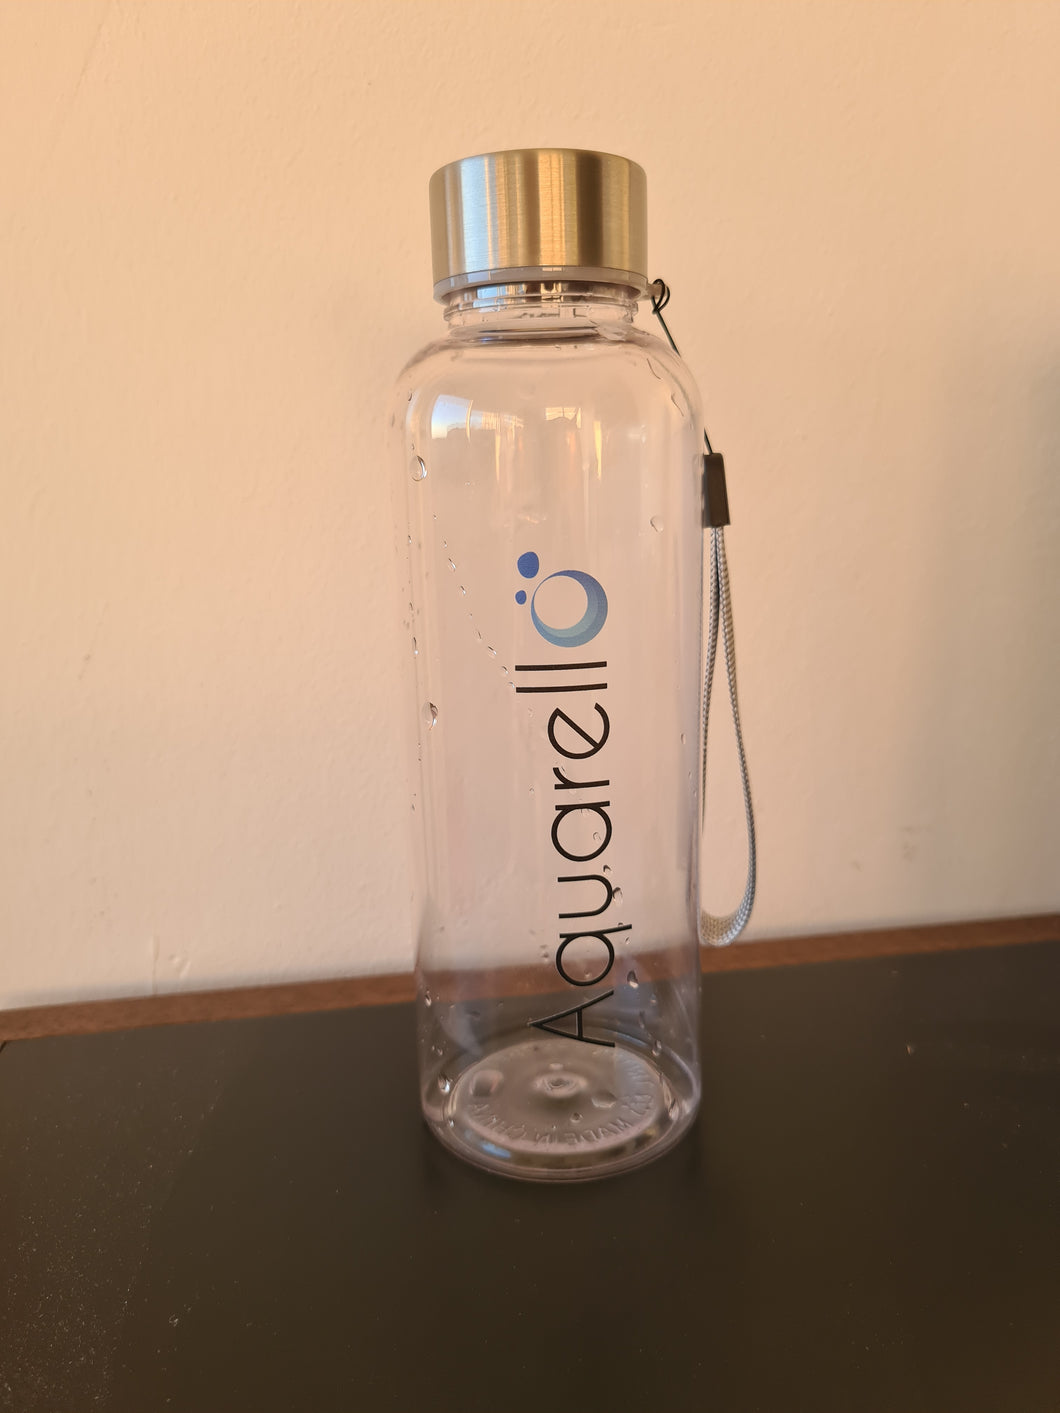 A 5dl drinking bottle made from Tritan material